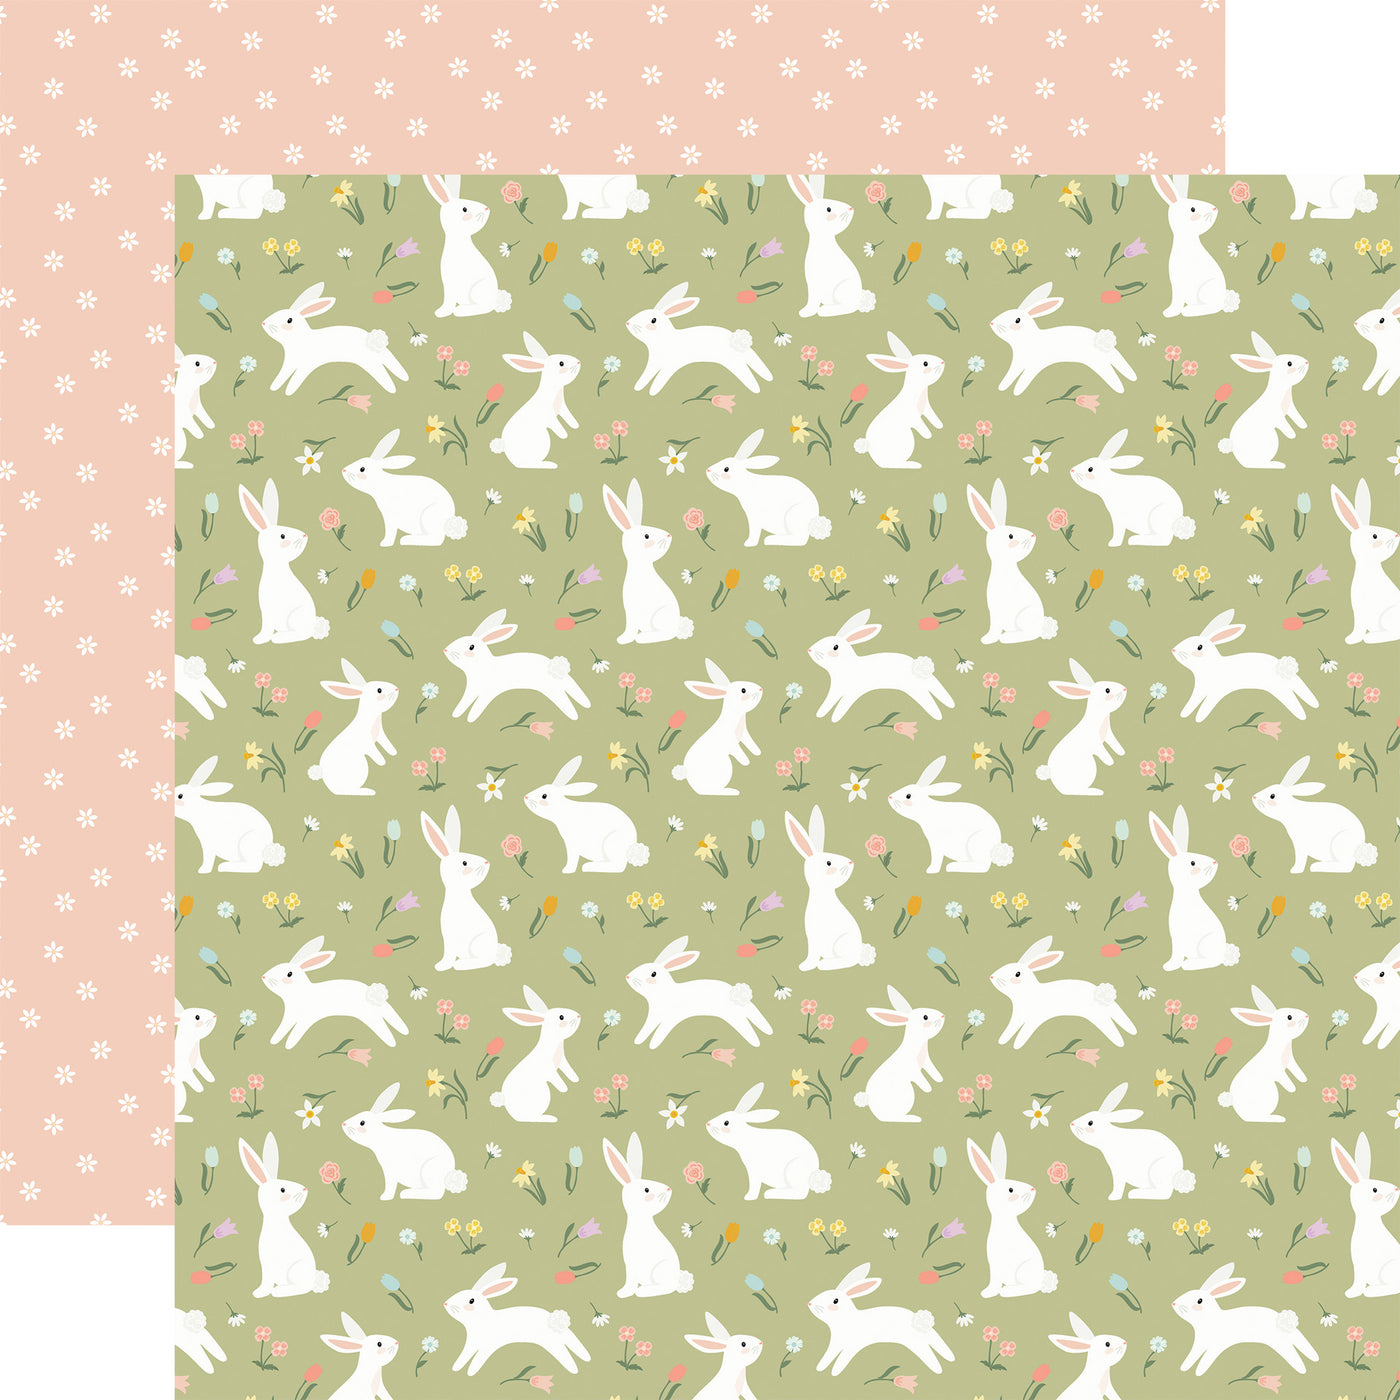 BLISSFUL BUNNIES - 12x12 Double-Sided Patterned Paper - Echo Park